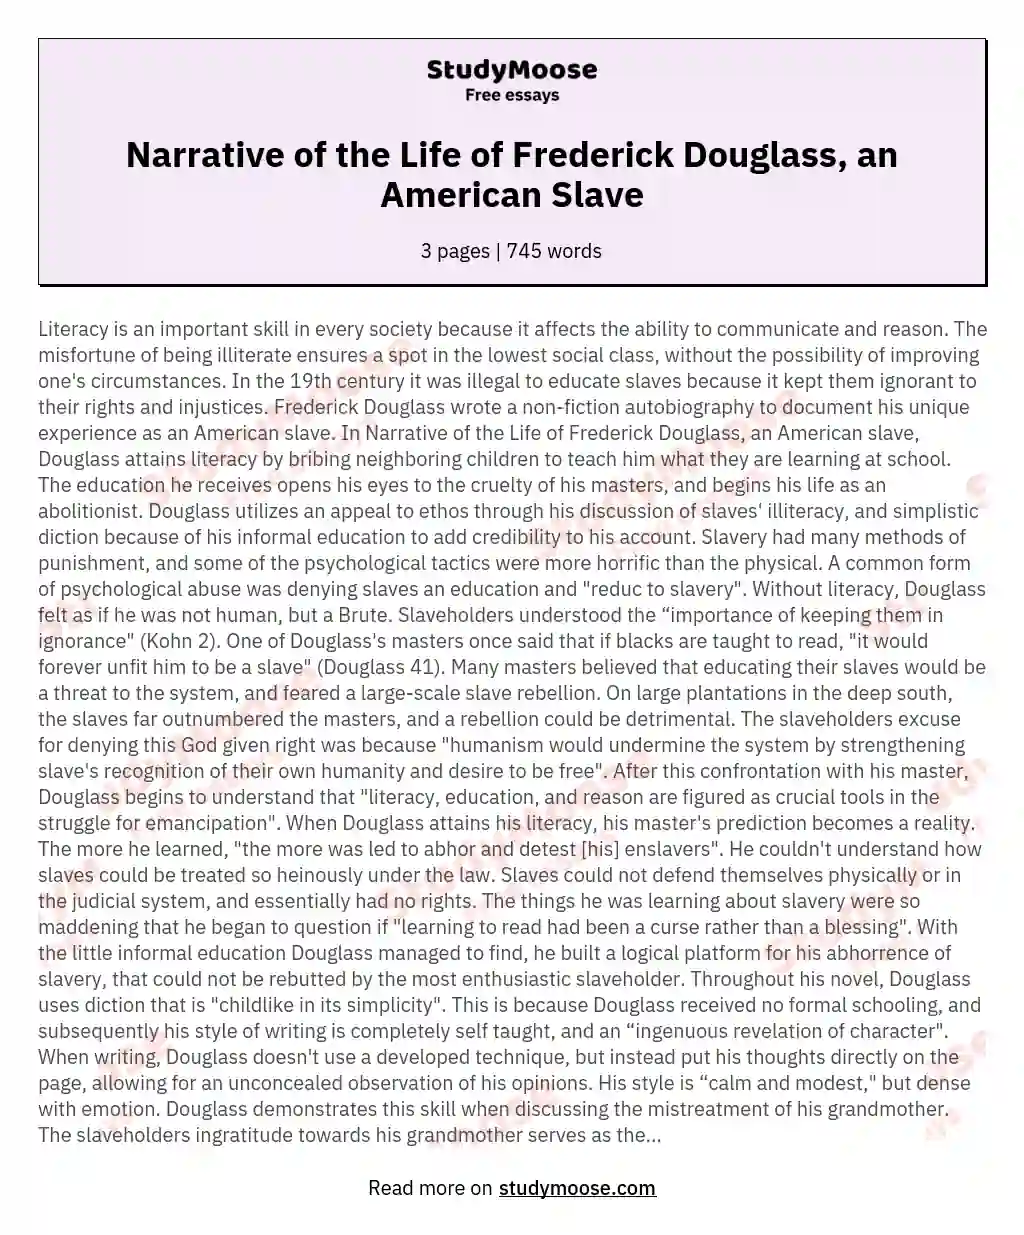 Narrative of the Life of Frederick Douglass, an American Slave essay